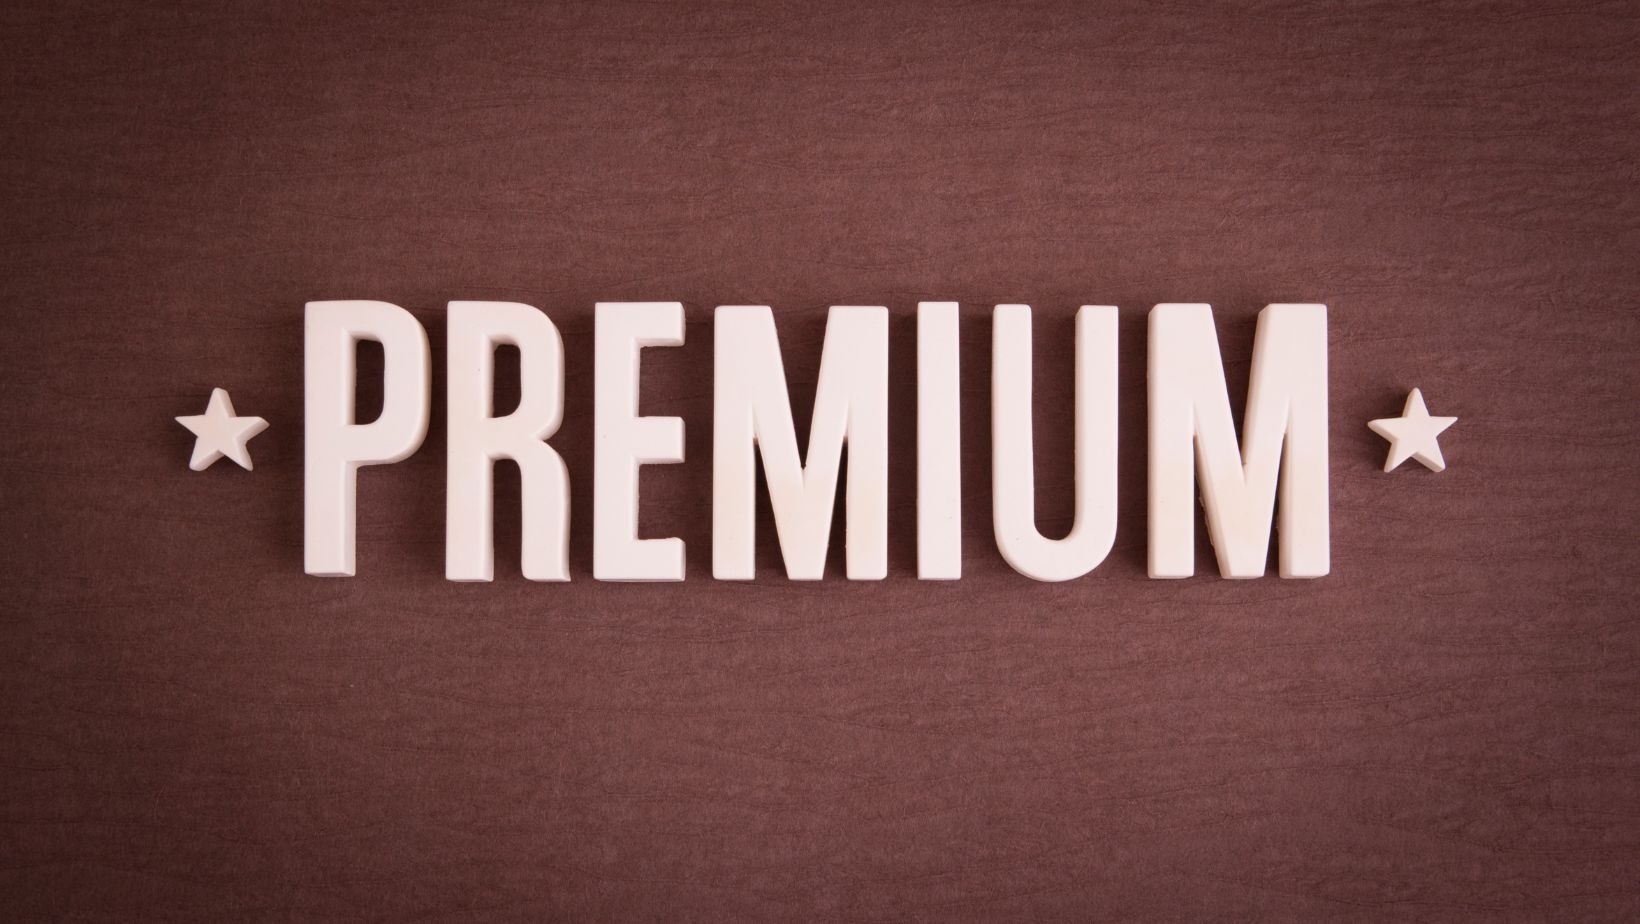 premium mode is a term used to describe the